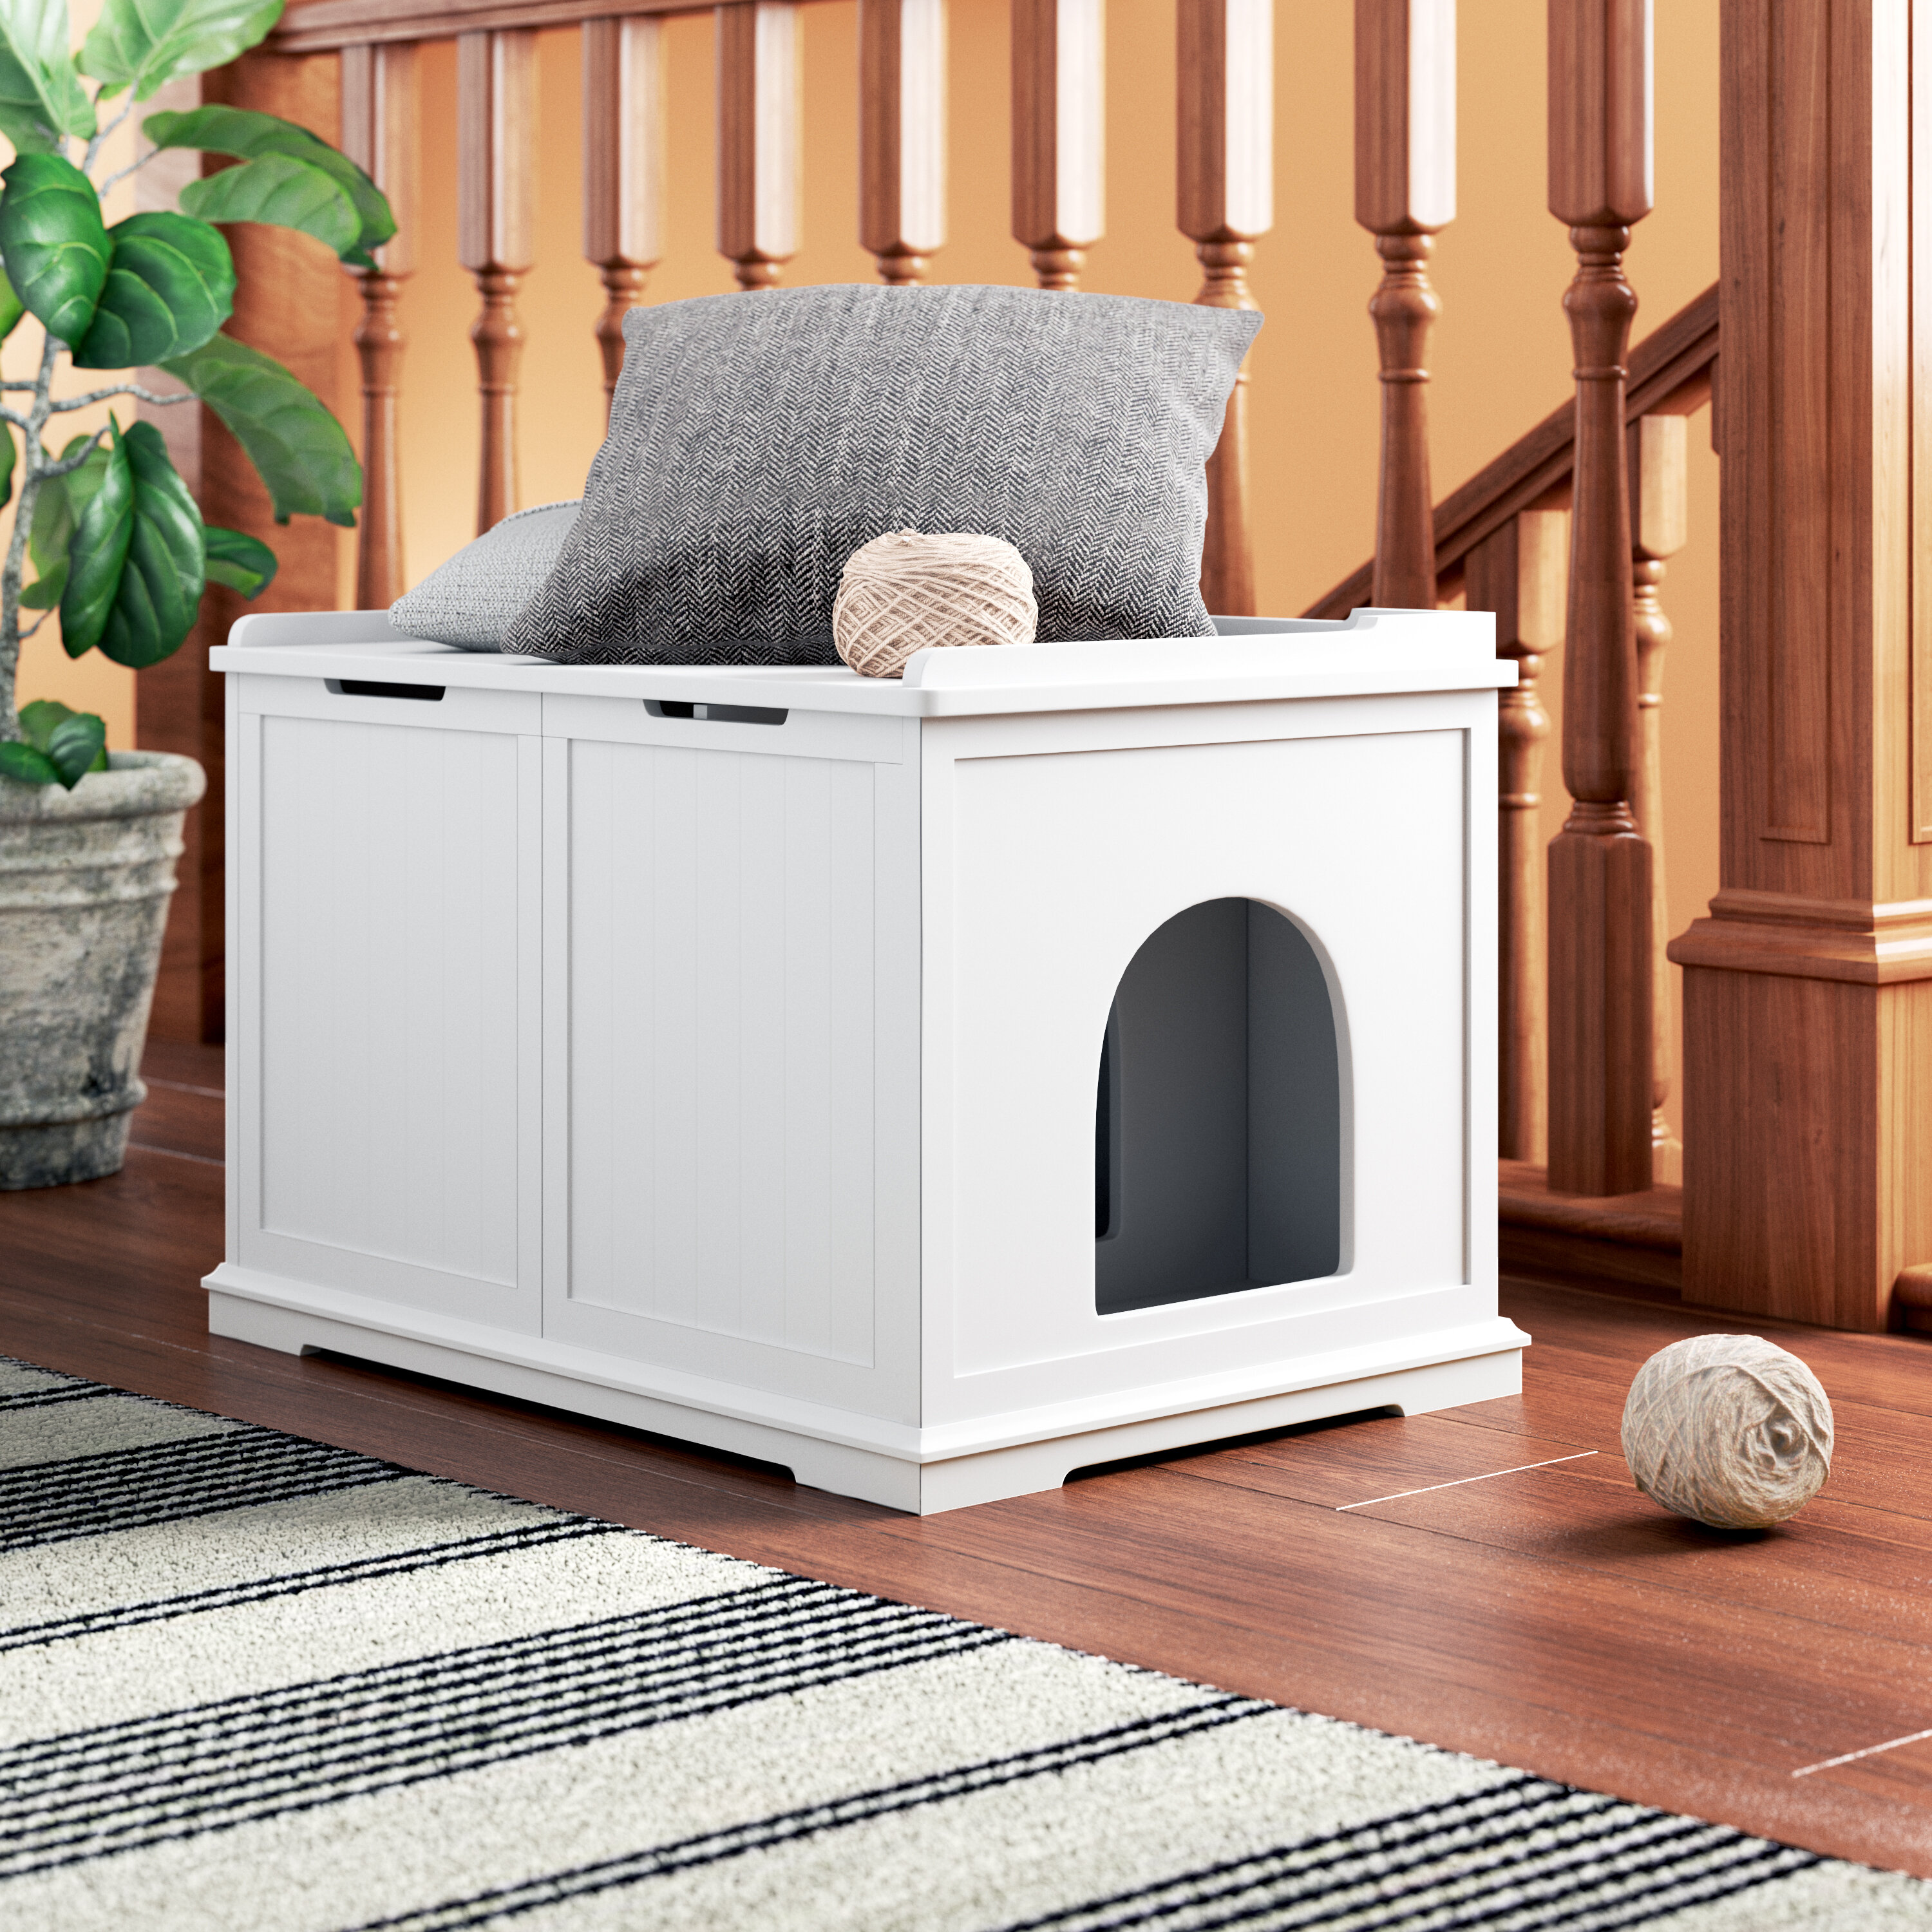 covered litter box furniture